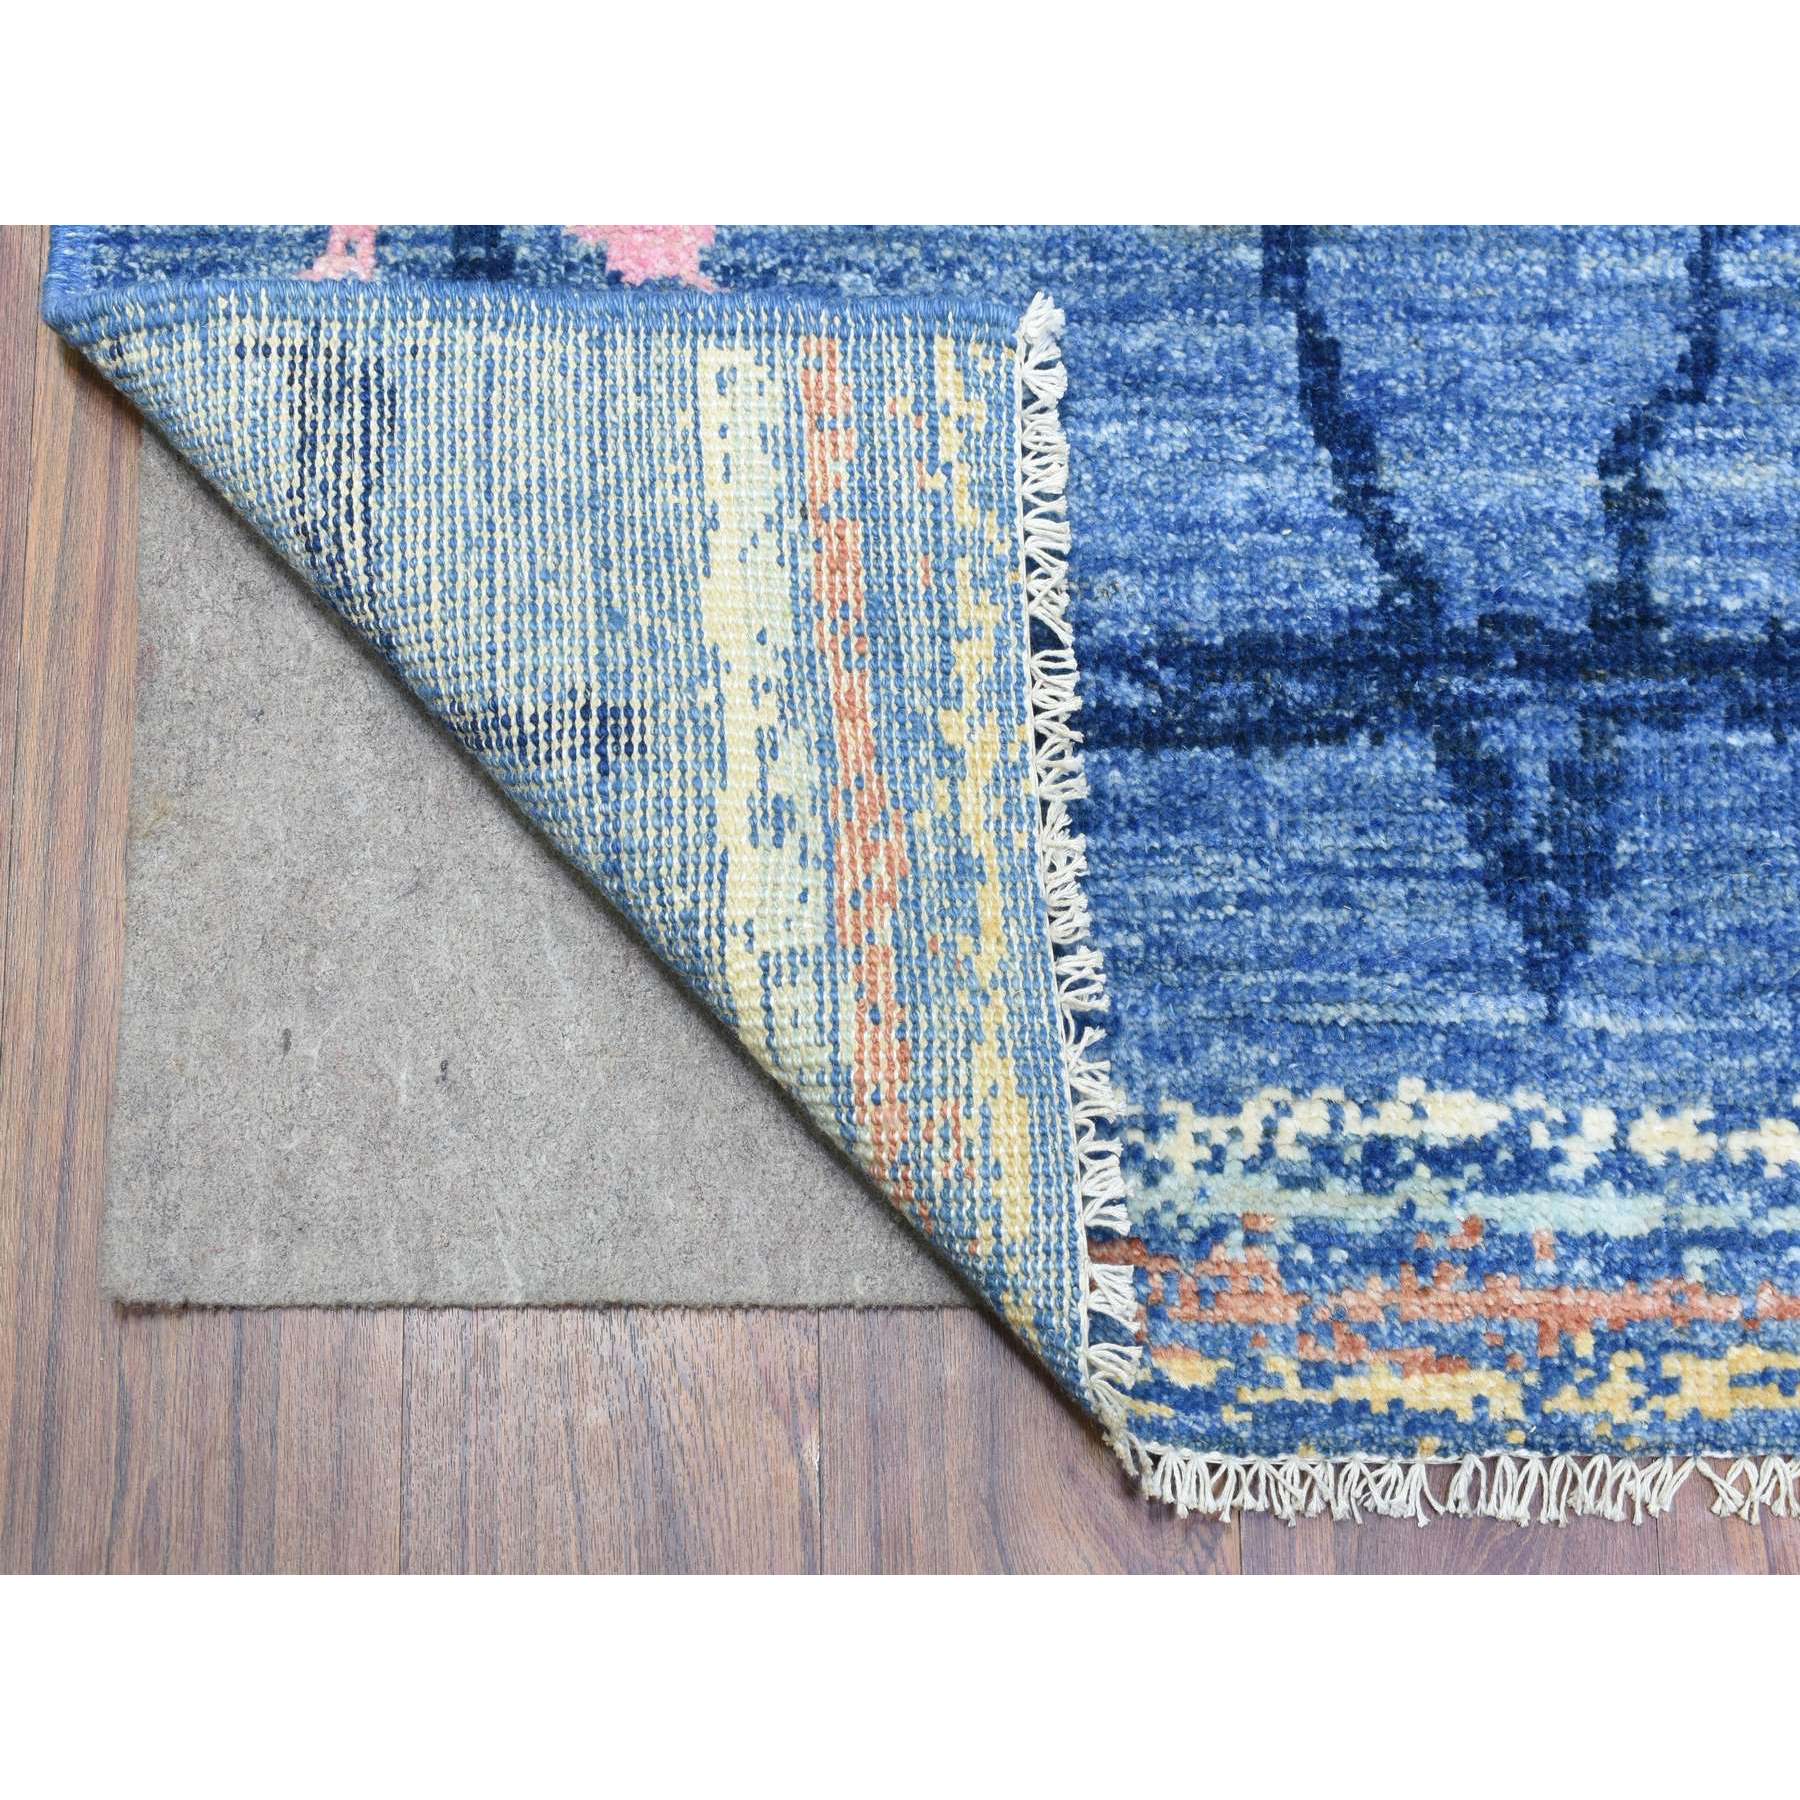 6'3"x8'10" Denim Blue, Hand Woven Boujaad Moroccan Berber Design with Criss Cross Pattern, Natural Dyes Organic Wool, Oriental Rug 